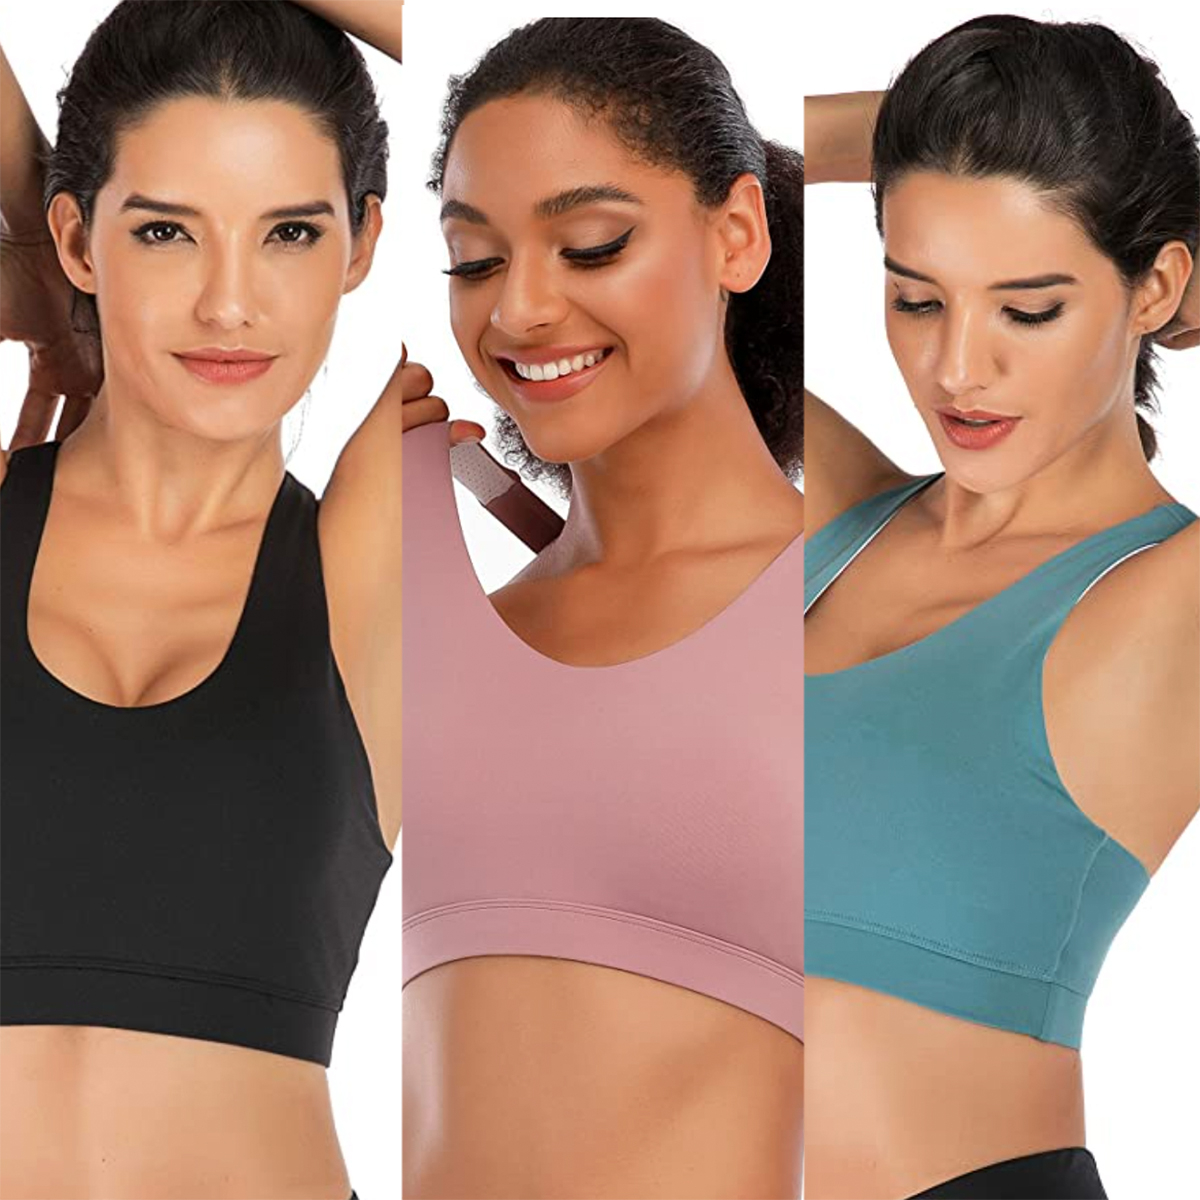 Prime Day Deal: Score a Sports Bra With 25,700+ 5-Star Reviews For $17